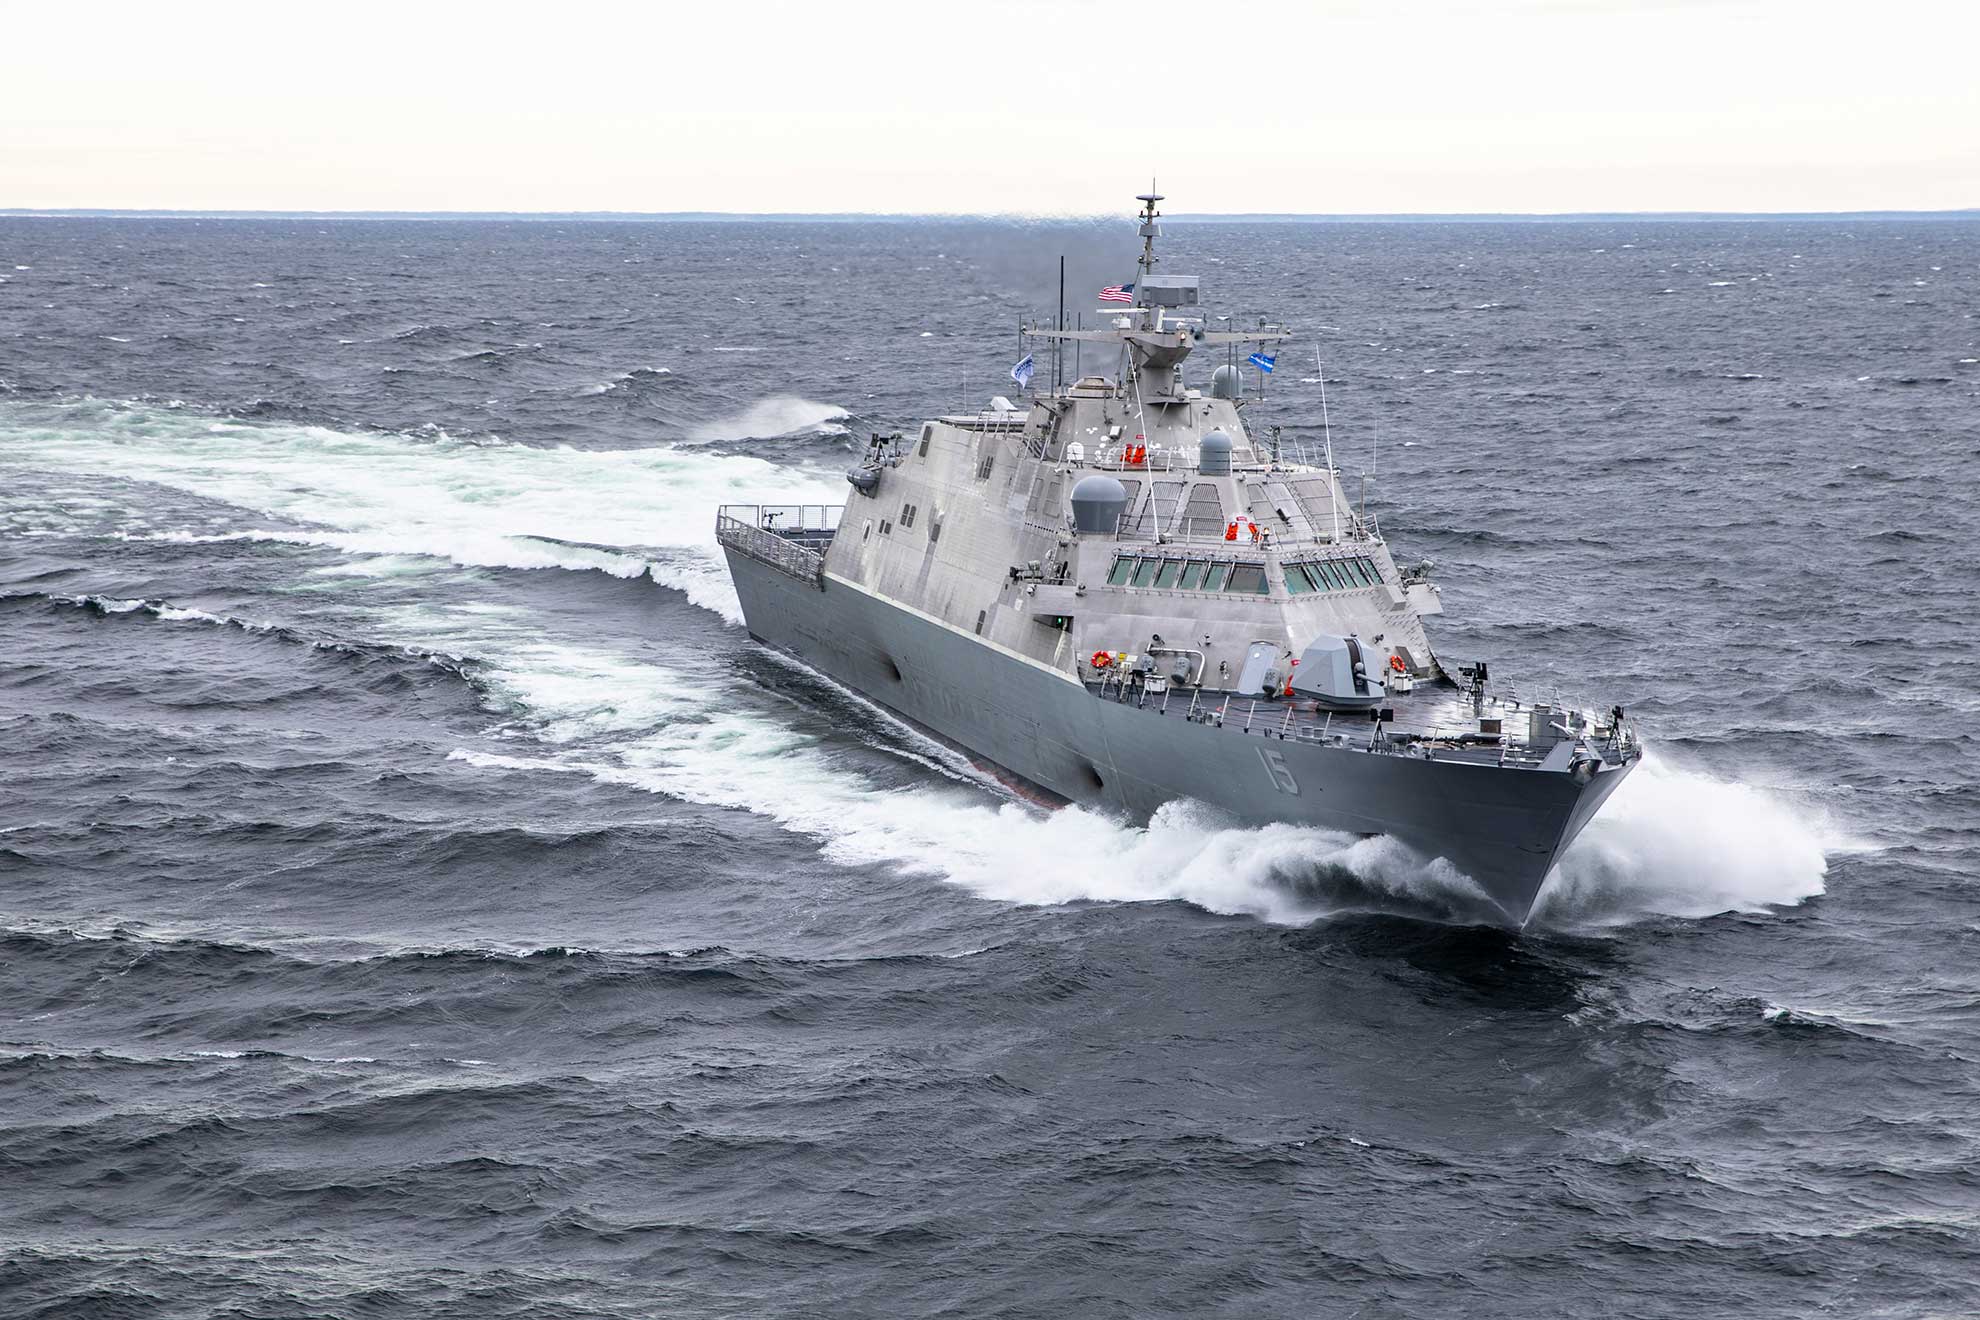 Marinette, Wis. (Dec. 6, 2018) The future littoral combat ship USS Billings (LCS 15) conducts acceptance trials on Lake Michigan, Dec. 6, 2018. Billings is the 17th littoral combat ship, an adaptable platform designed to support focused mine countermeasures, anti-submarine warfare and surface warfare missions -- U.S. Navy photo courtesy of Lockheed Martin. -